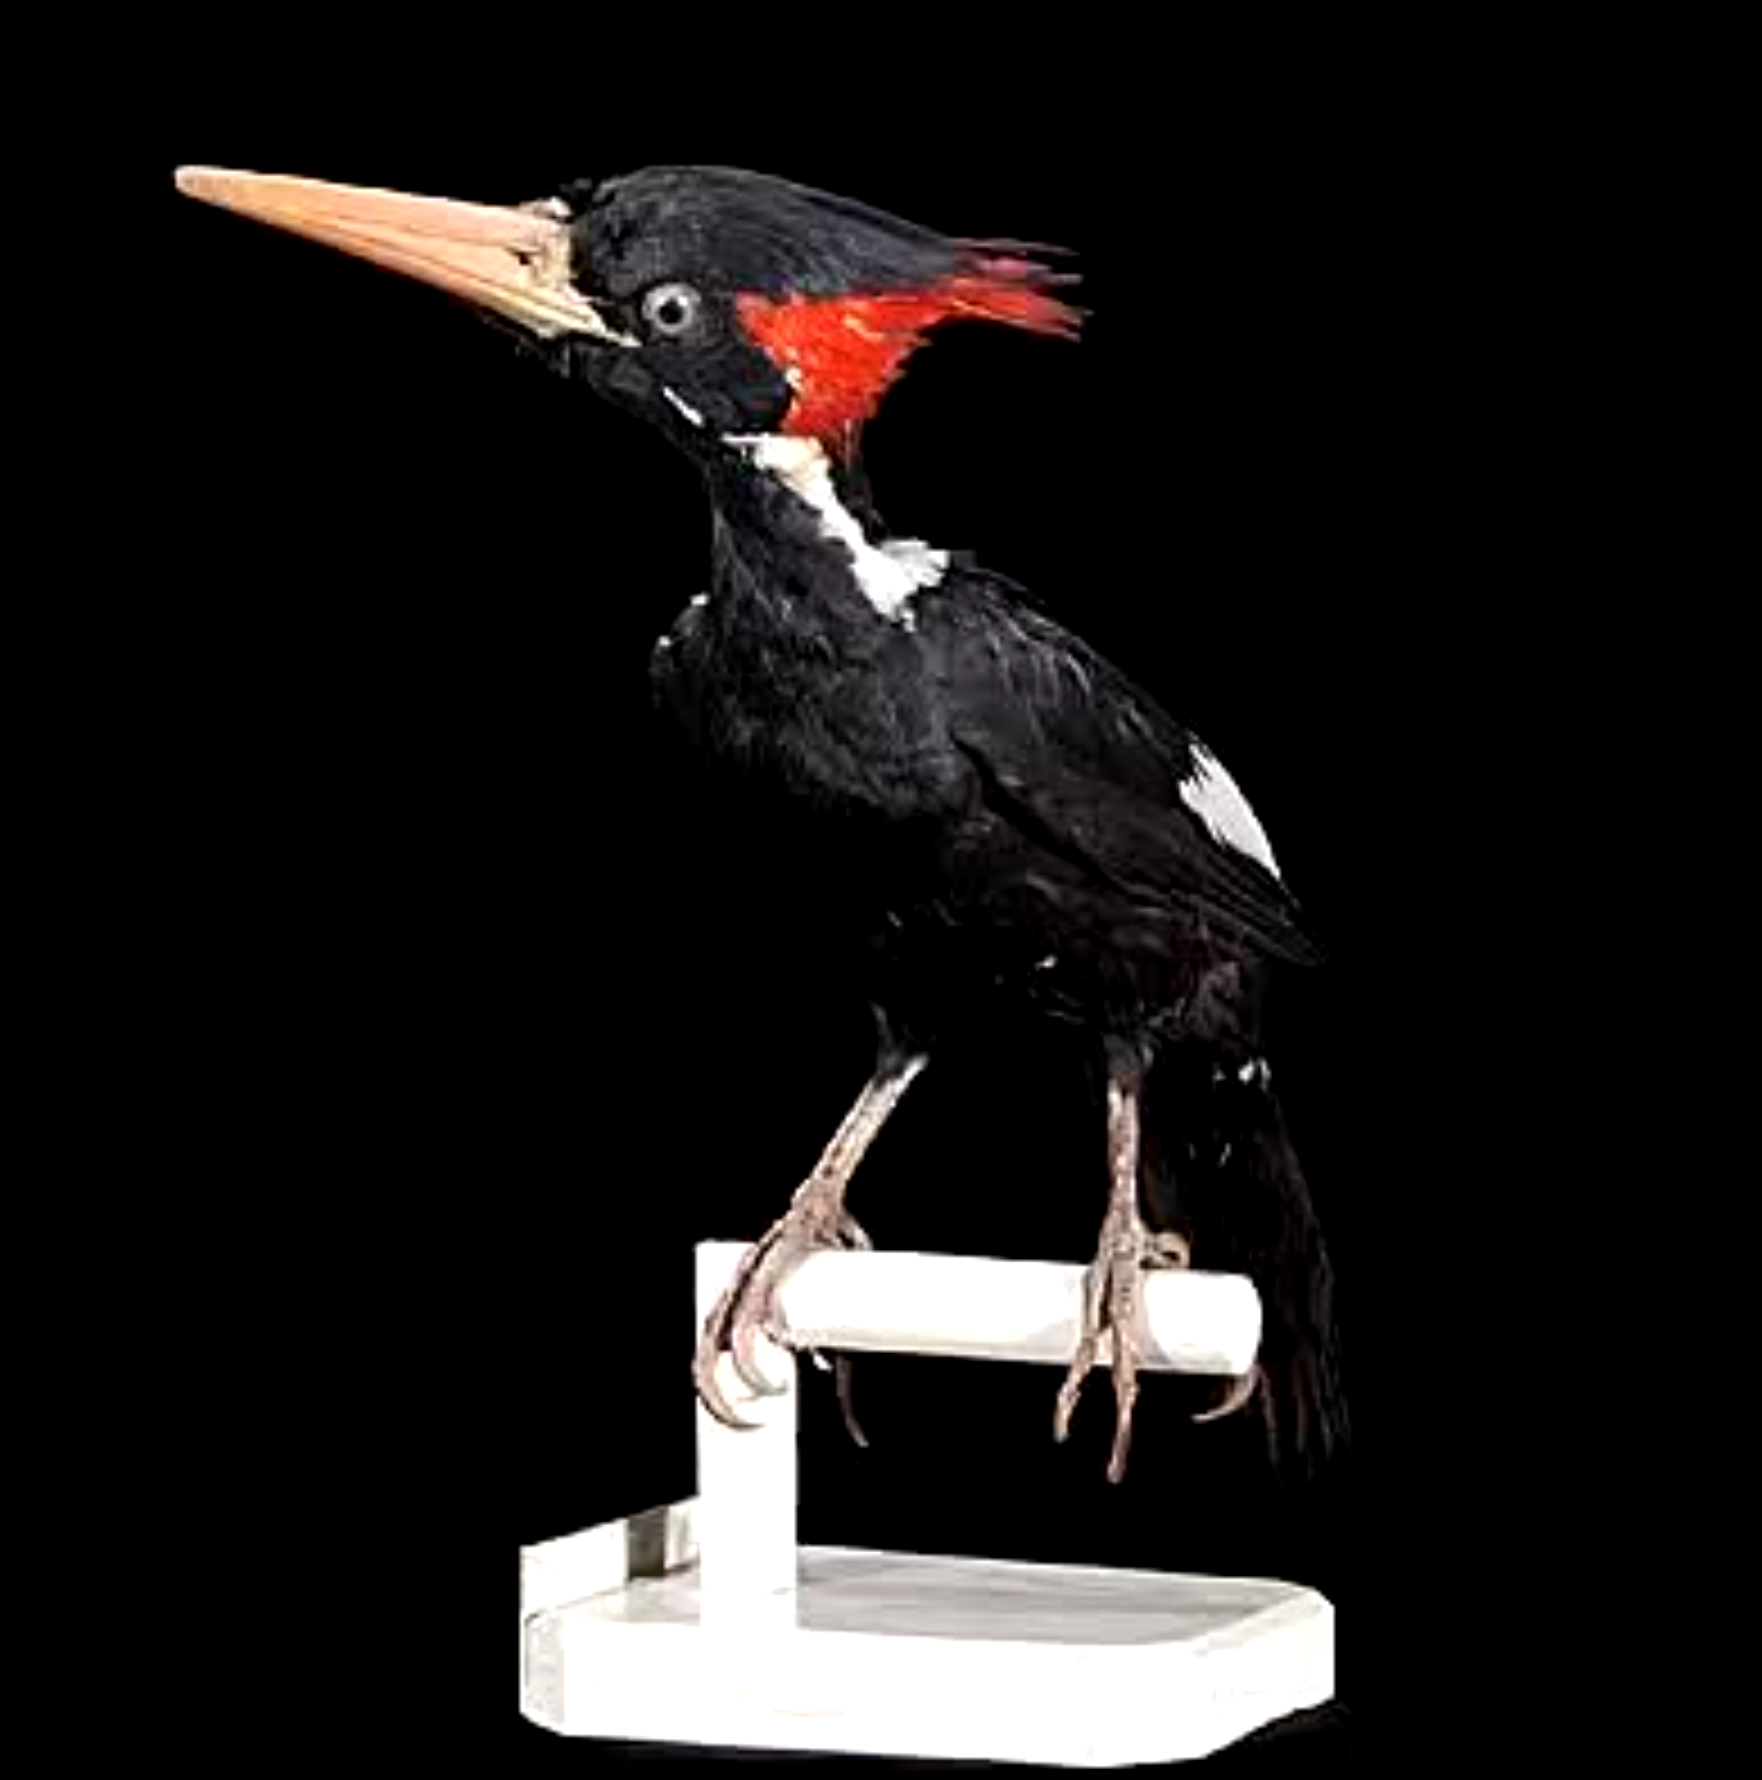 'Campephilus principalis,' a large shiny blue-black woodpecker (19-21 inches), with ivory bill, light brown feet, white on its cheeks and on the upper half of its wings, red at the back of its head and crest.